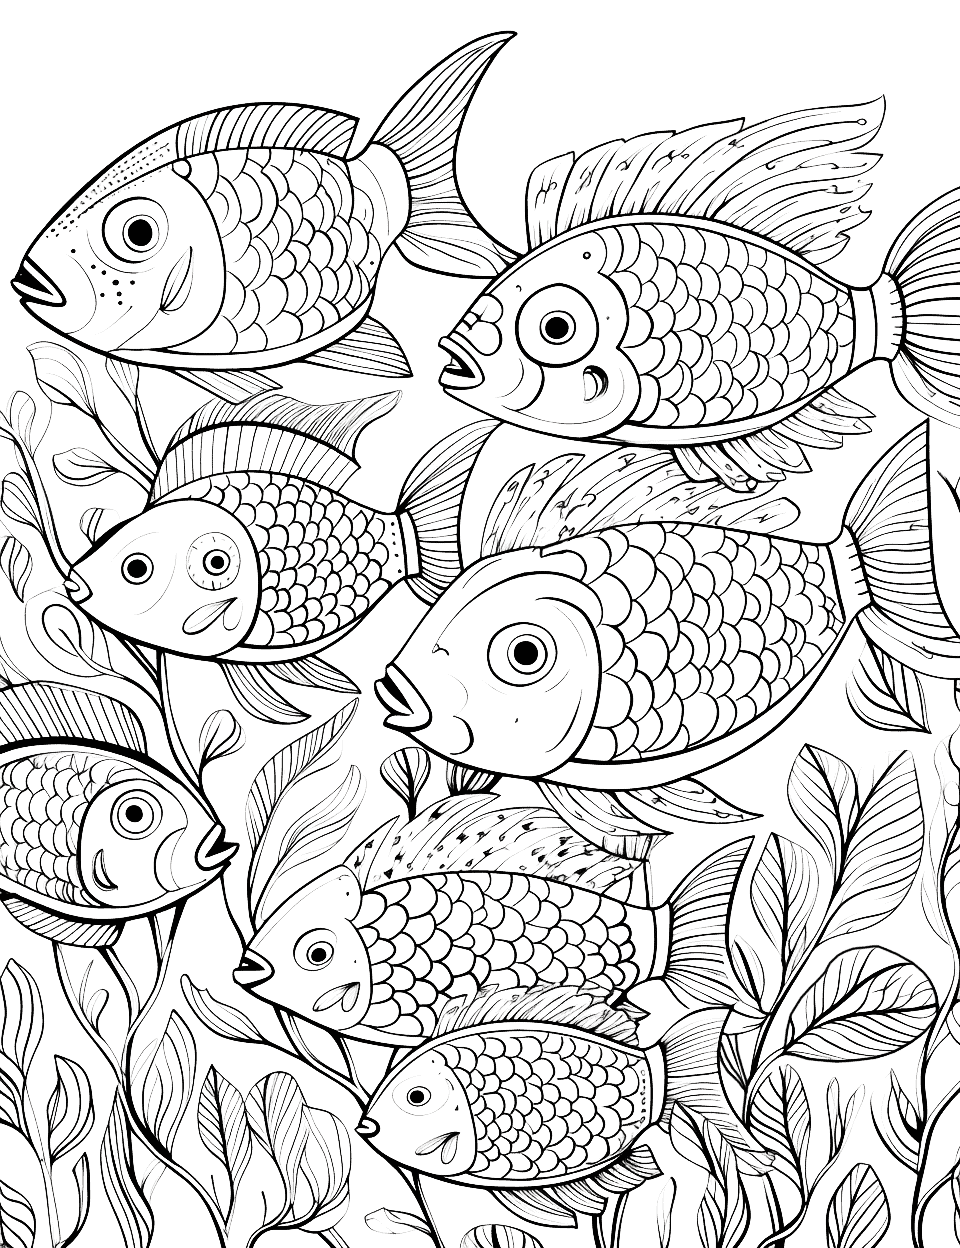 Fish School Harmony Adult Coloring Page - A group of fish swimming in a coordinated pattern.